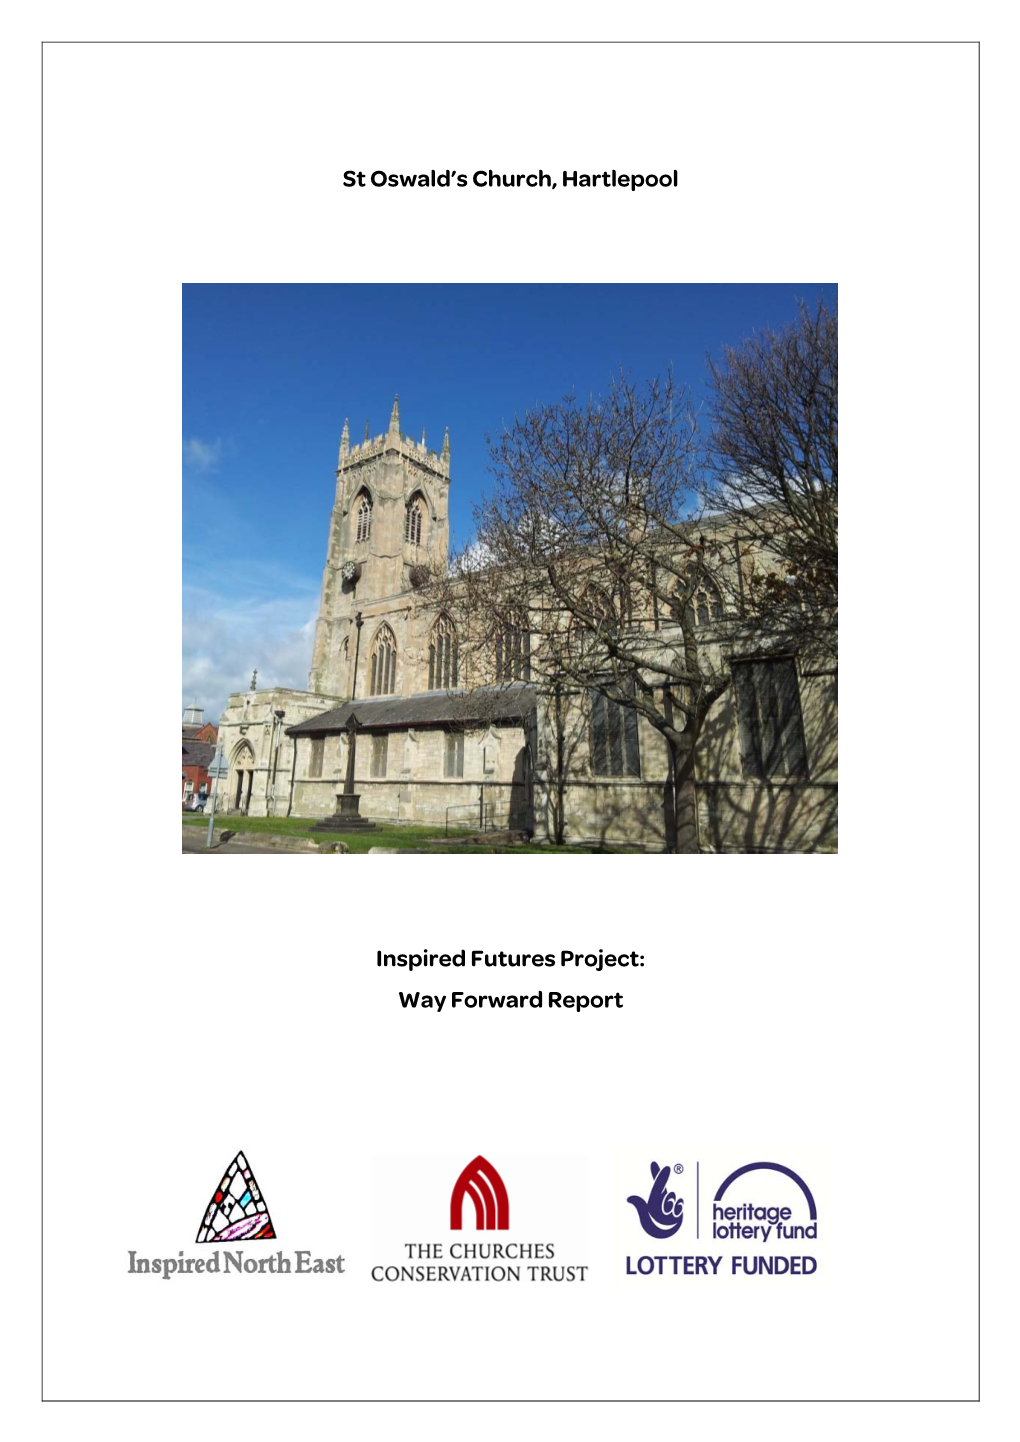 St Oswald's Church, Hartlepool Inspired Futures Project: Way